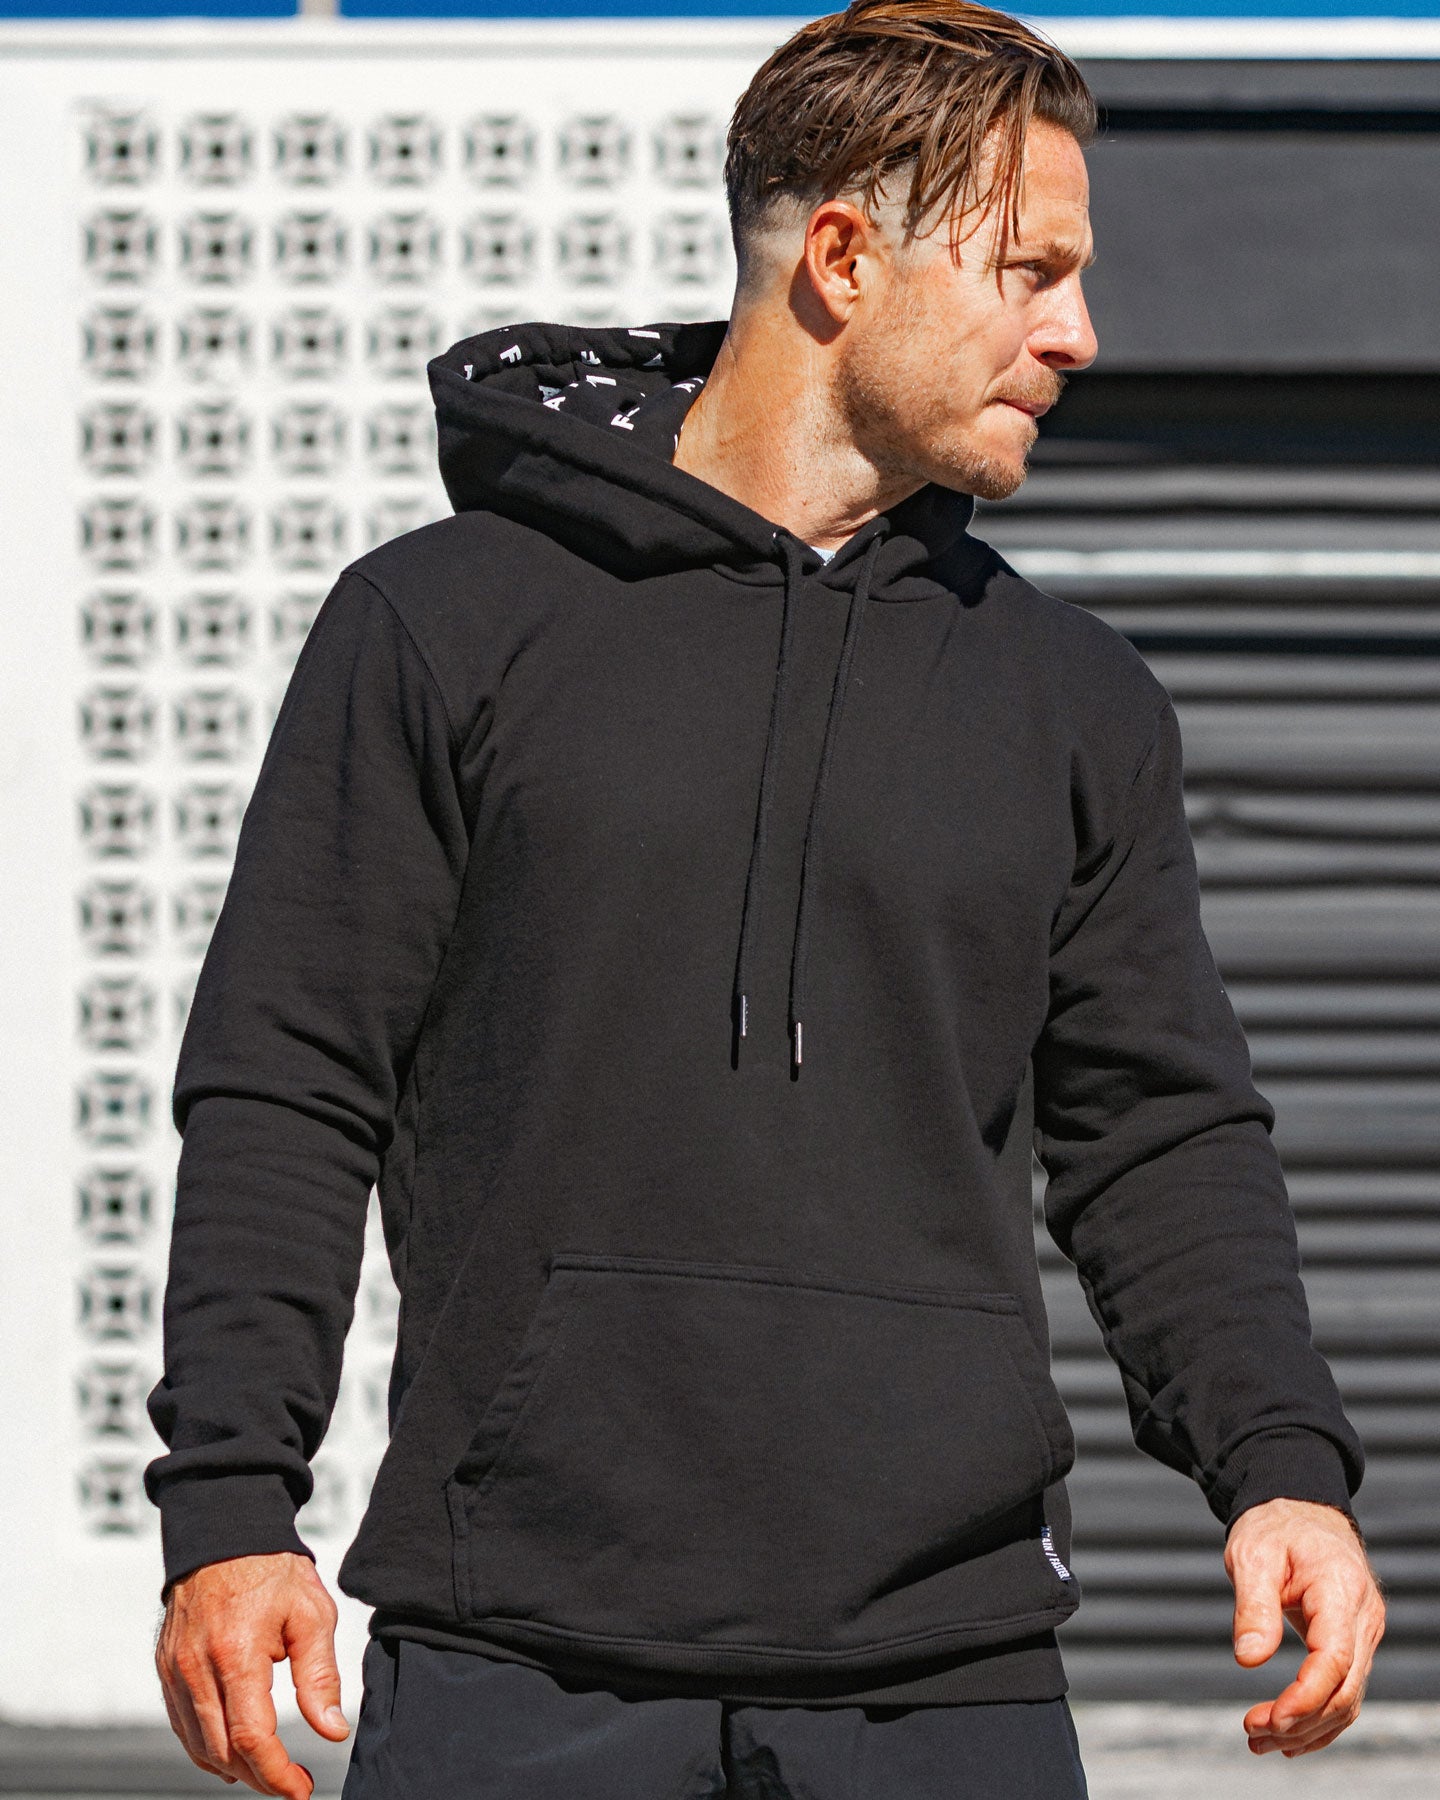 The Gym People  Fleece Pullover Sweatshirt review - TODAY